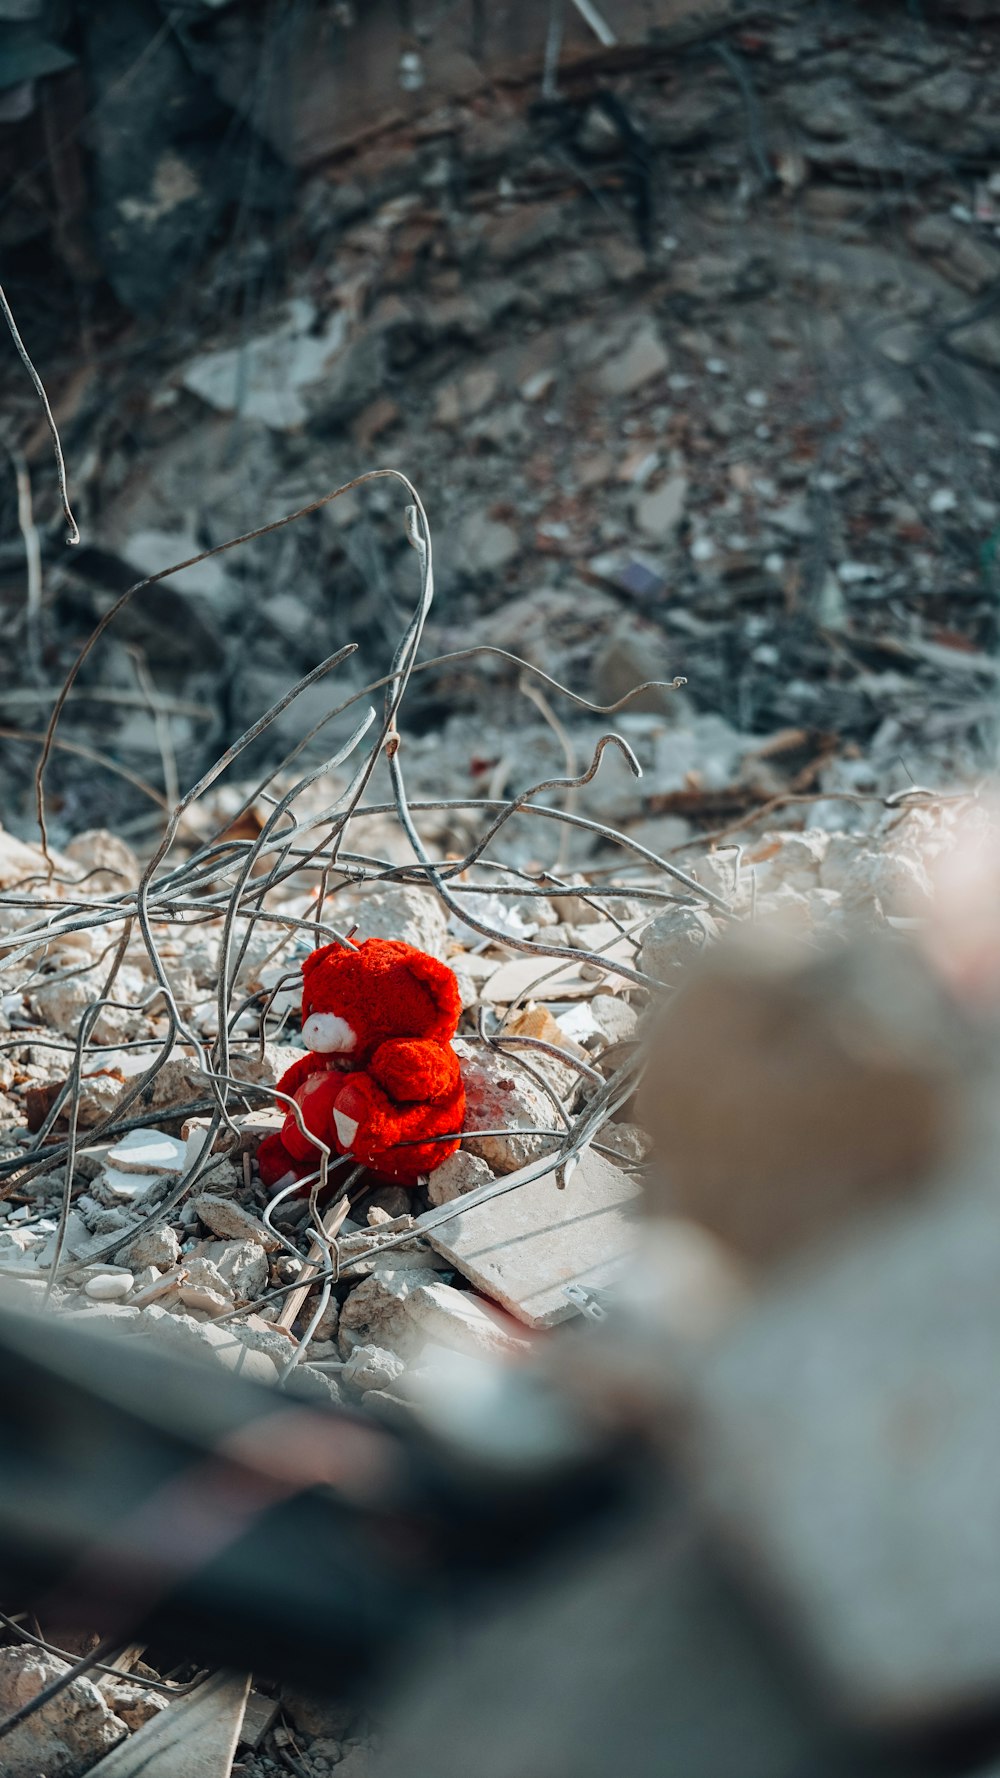 a red teddy bear sitting on top of a pile of rubble